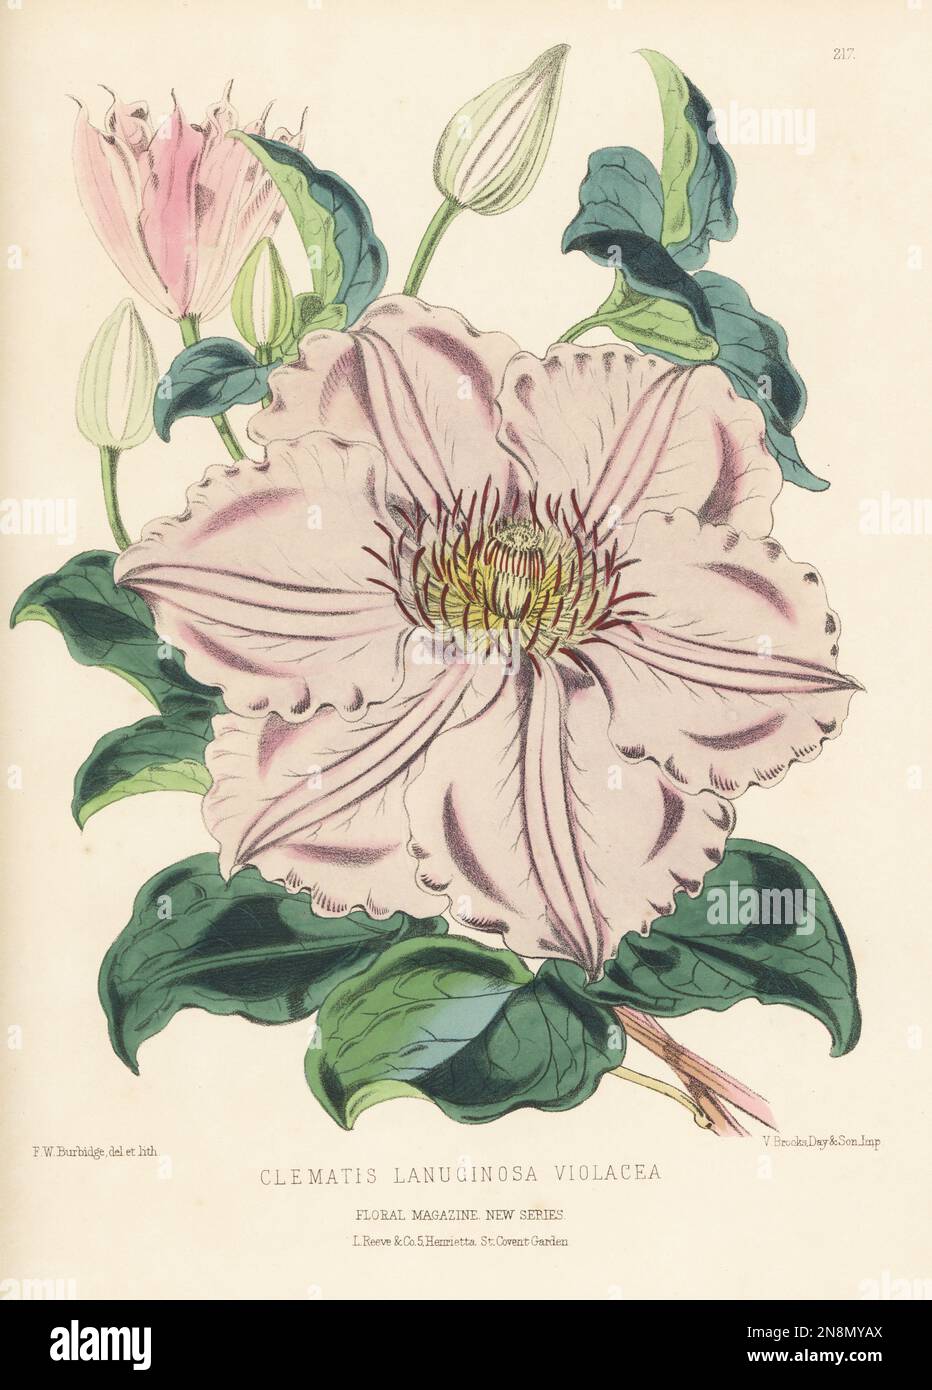 Violet clematis hybrid, Clematis lanuginosa, native to Zhejiang, eastern China. Shown by Mr Noble of Bagshot. As Clematis lanuginosa violacea. Handcolored botanical illustration drawn and lithographed by Frederick William Burbidge from Henry Honywood Dombrain's Floral Magazine, New Series, Volume 5, L. Reeve, London, 1876. Lithograph printed by Vincent Brooks, Day & Son. Stock Photo